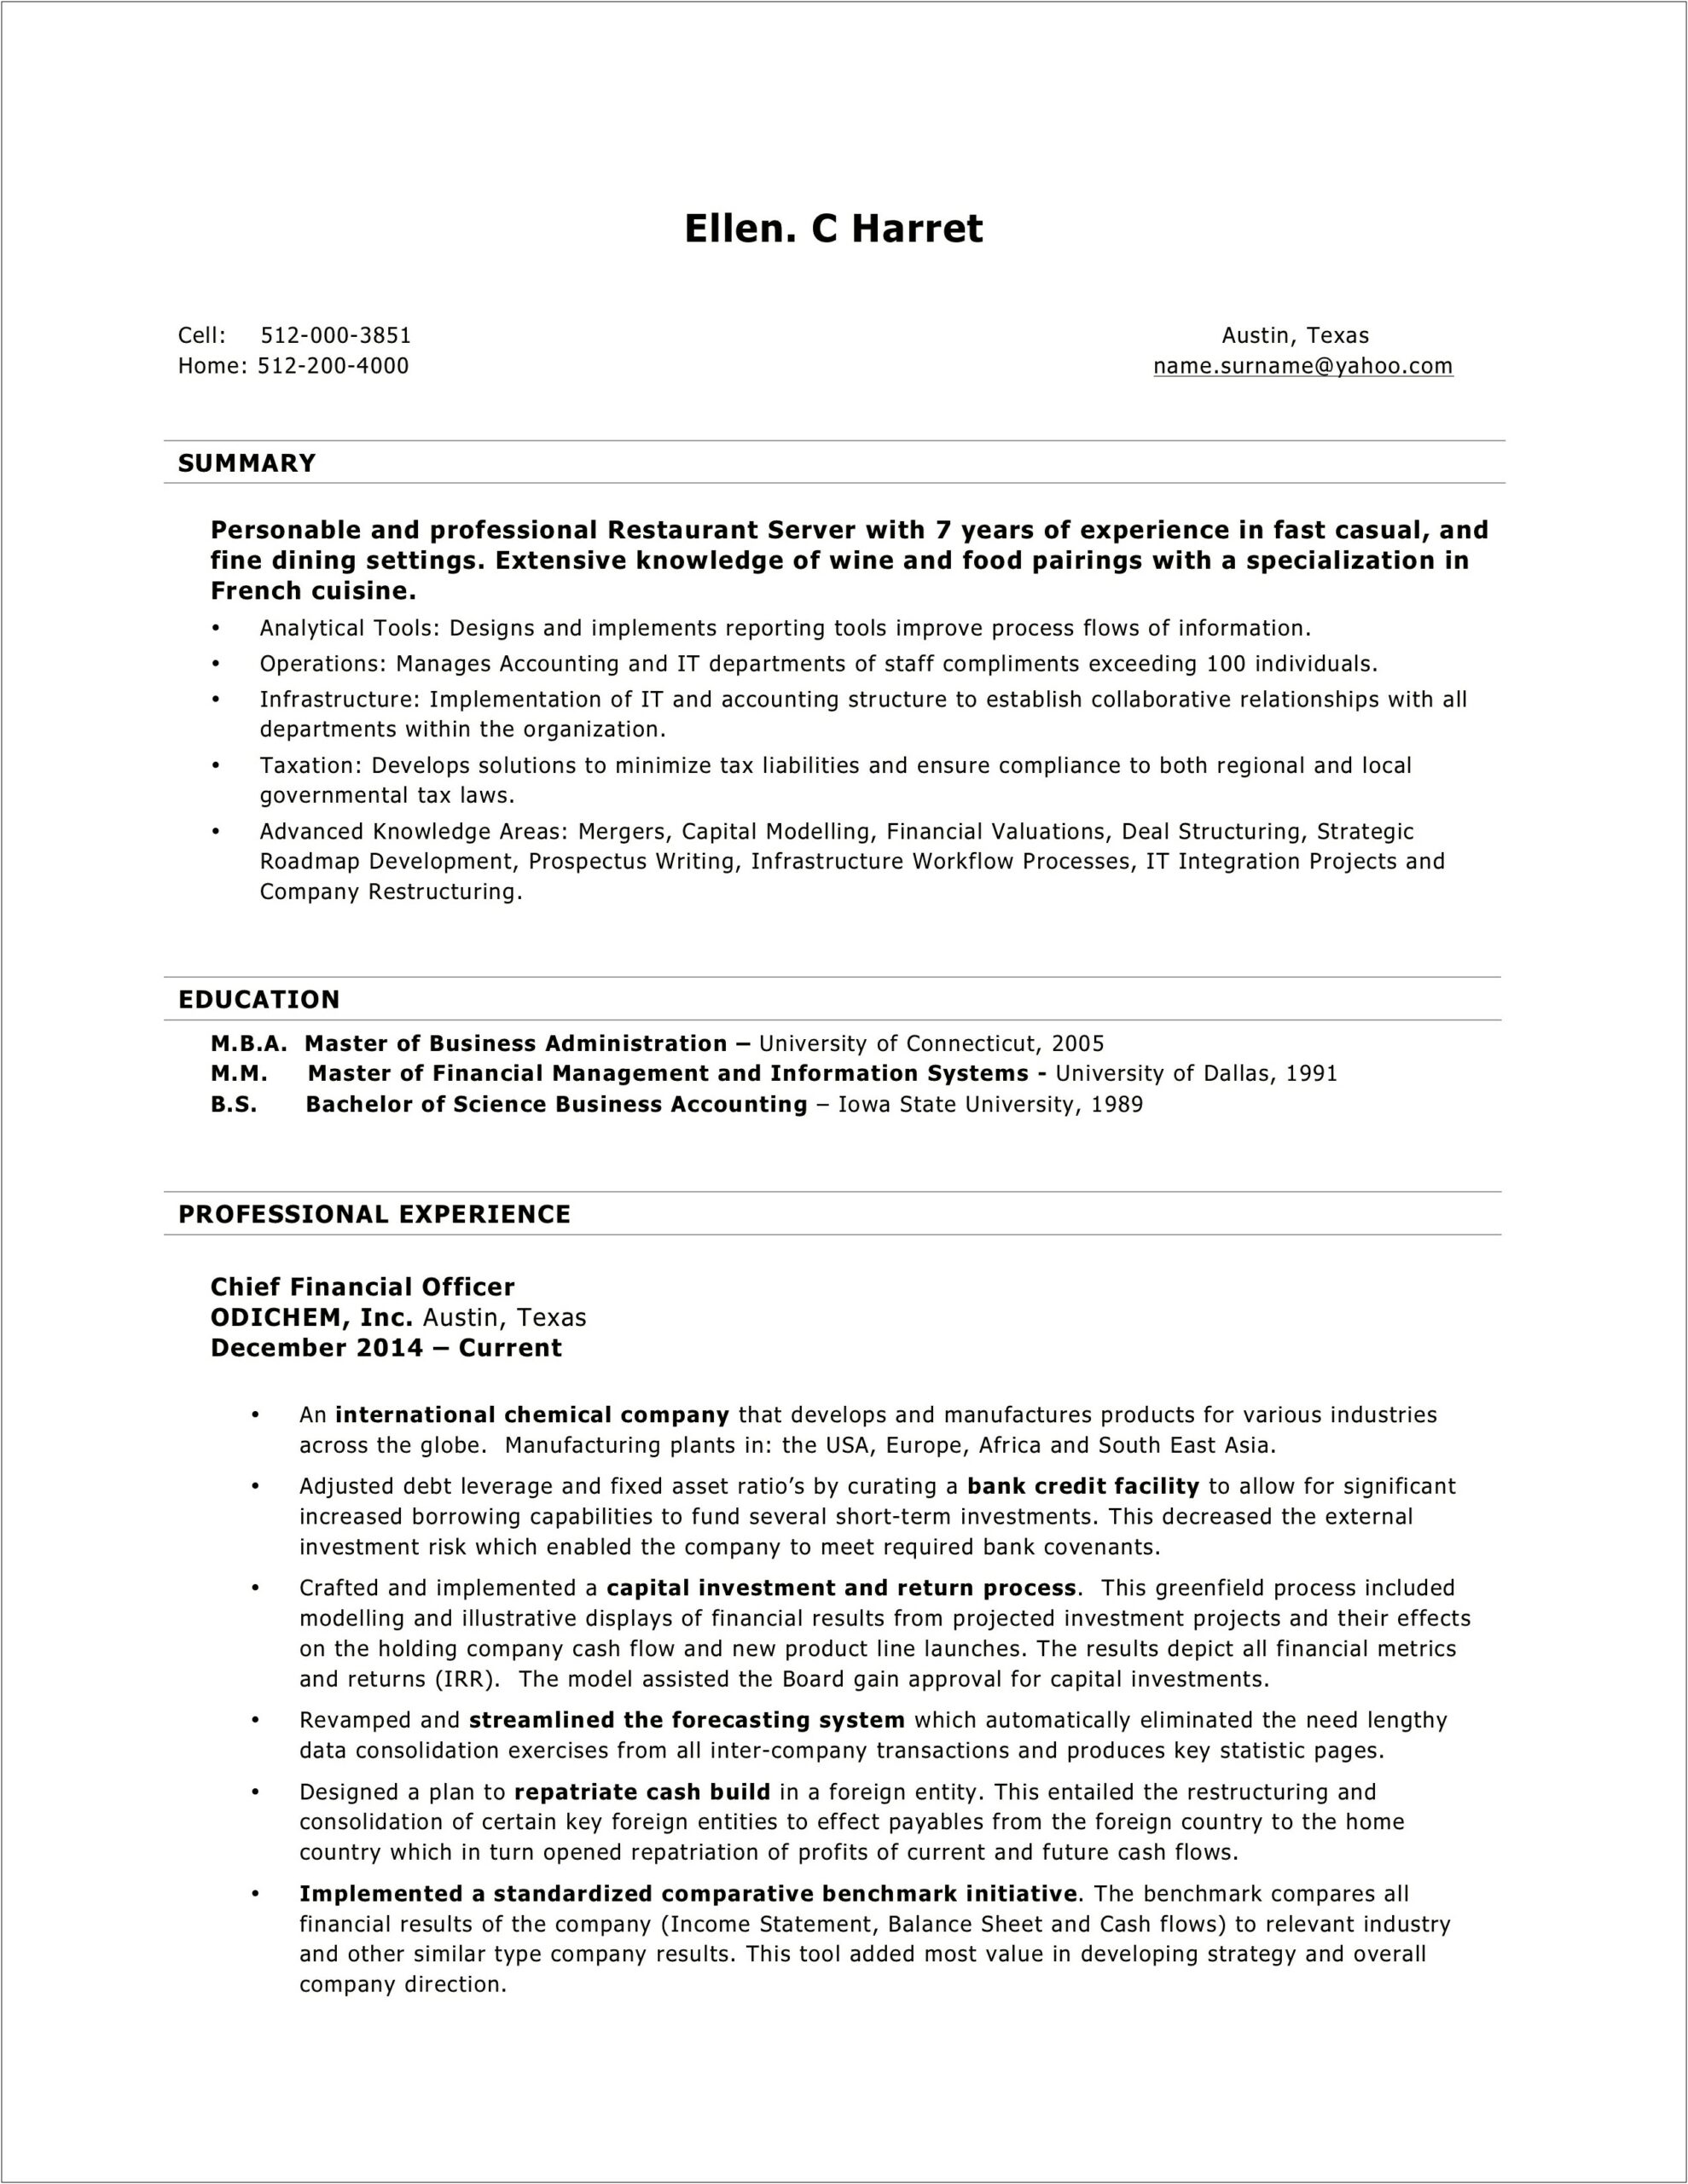 Basic Resume Format In Word Download